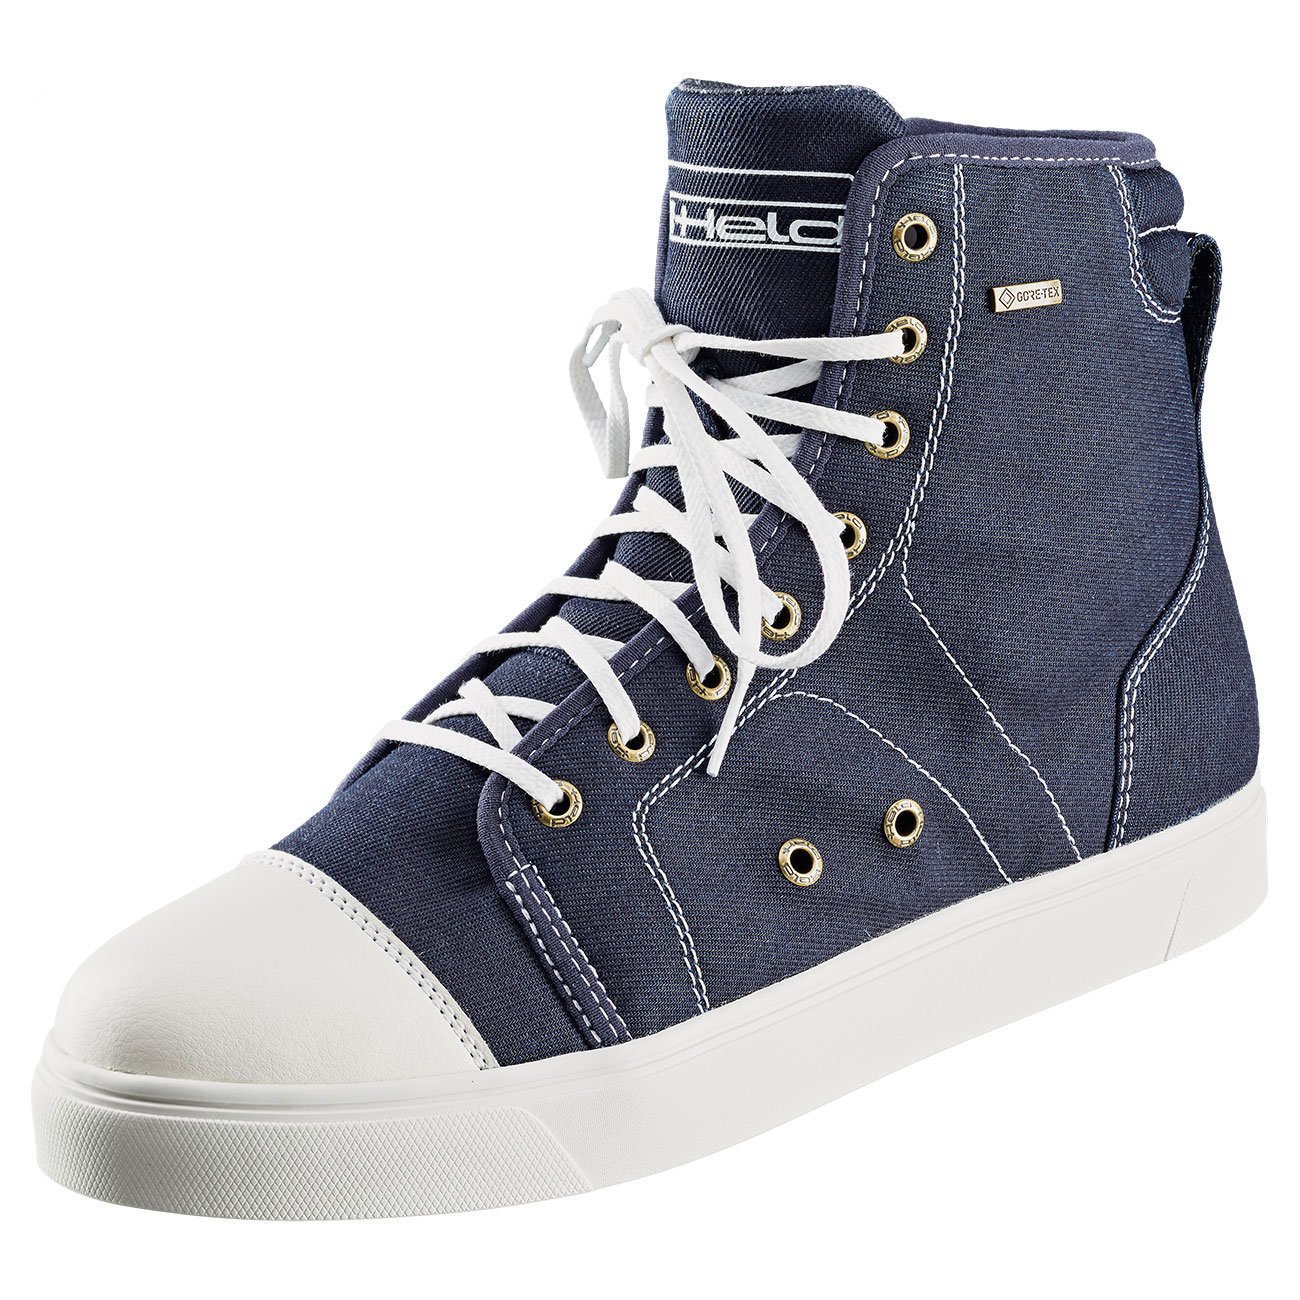 Image of EU Held College Rider GTX Bleu Chaussures Taille 38